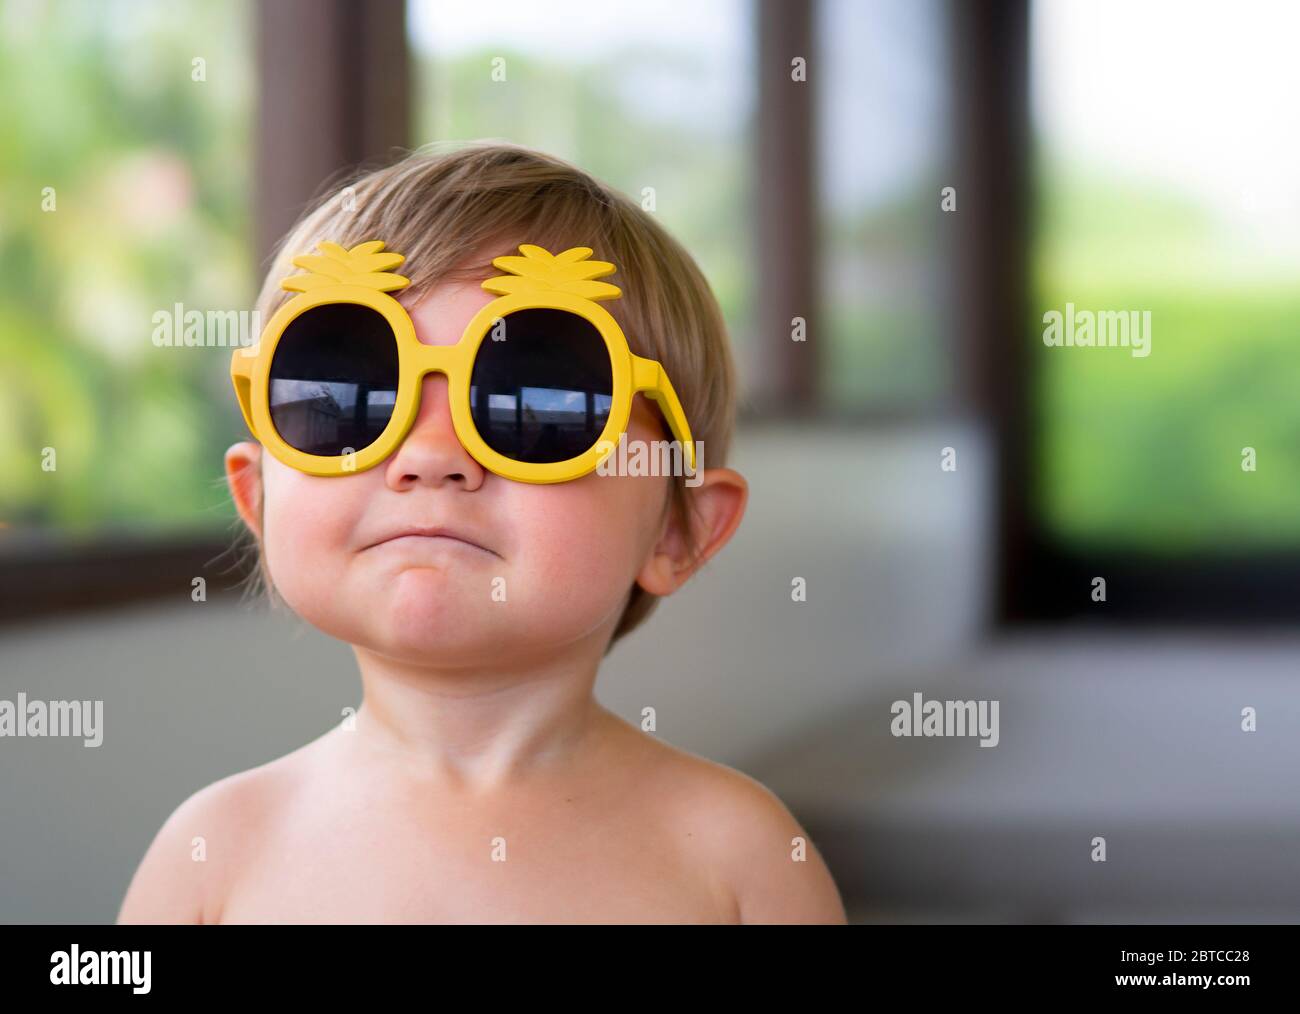 Portrait of a two year old boy wearing yellow sunglasses looking into camera Stock Photo